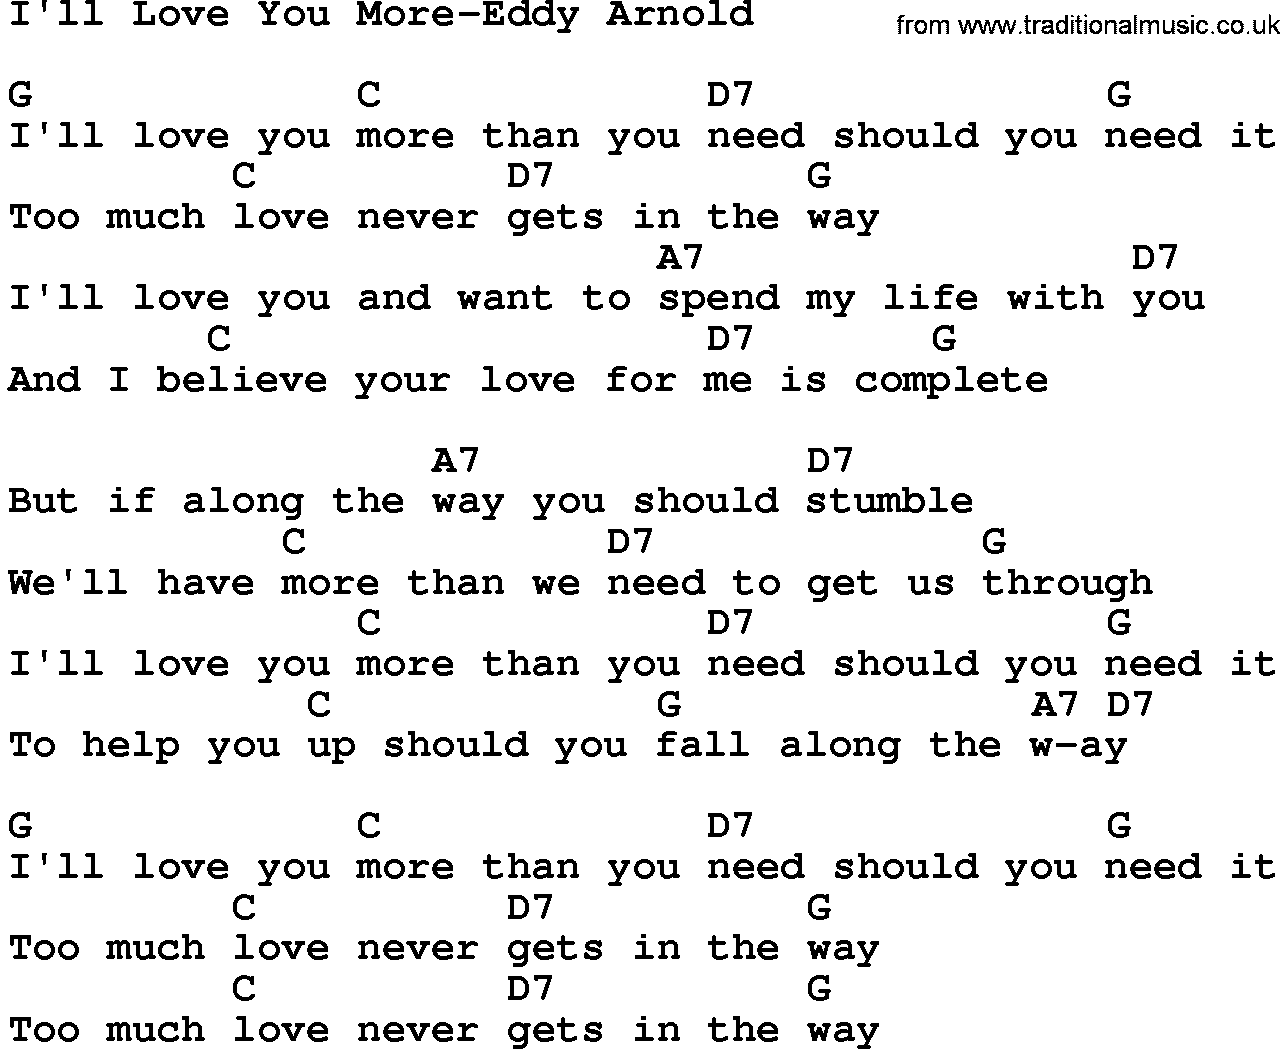 Country music song: I'll Love You More-Eddy Arnold lyrics and chords